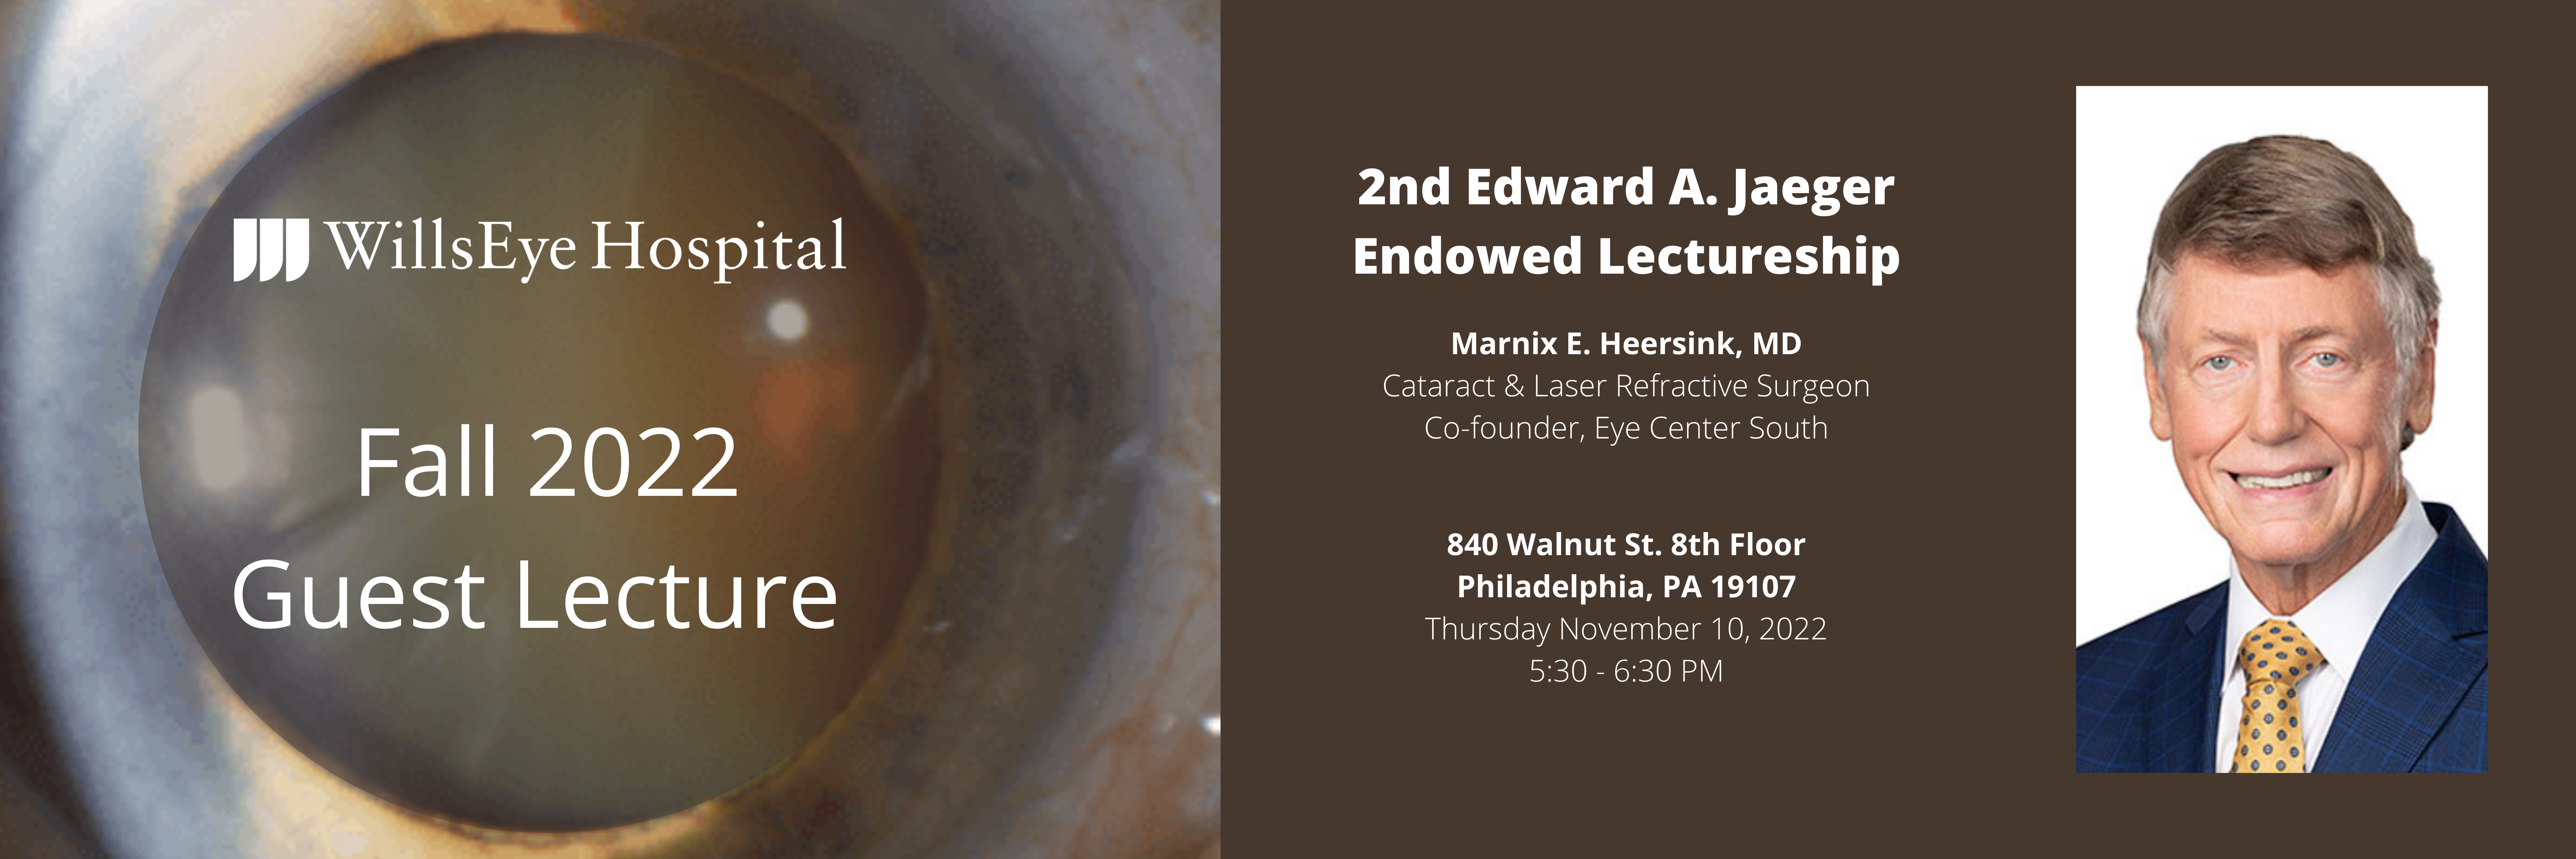 The Edward A. Jaeger Endowed Lectureship - Innovations and Entrepreneurship: Lessons Learned Banner